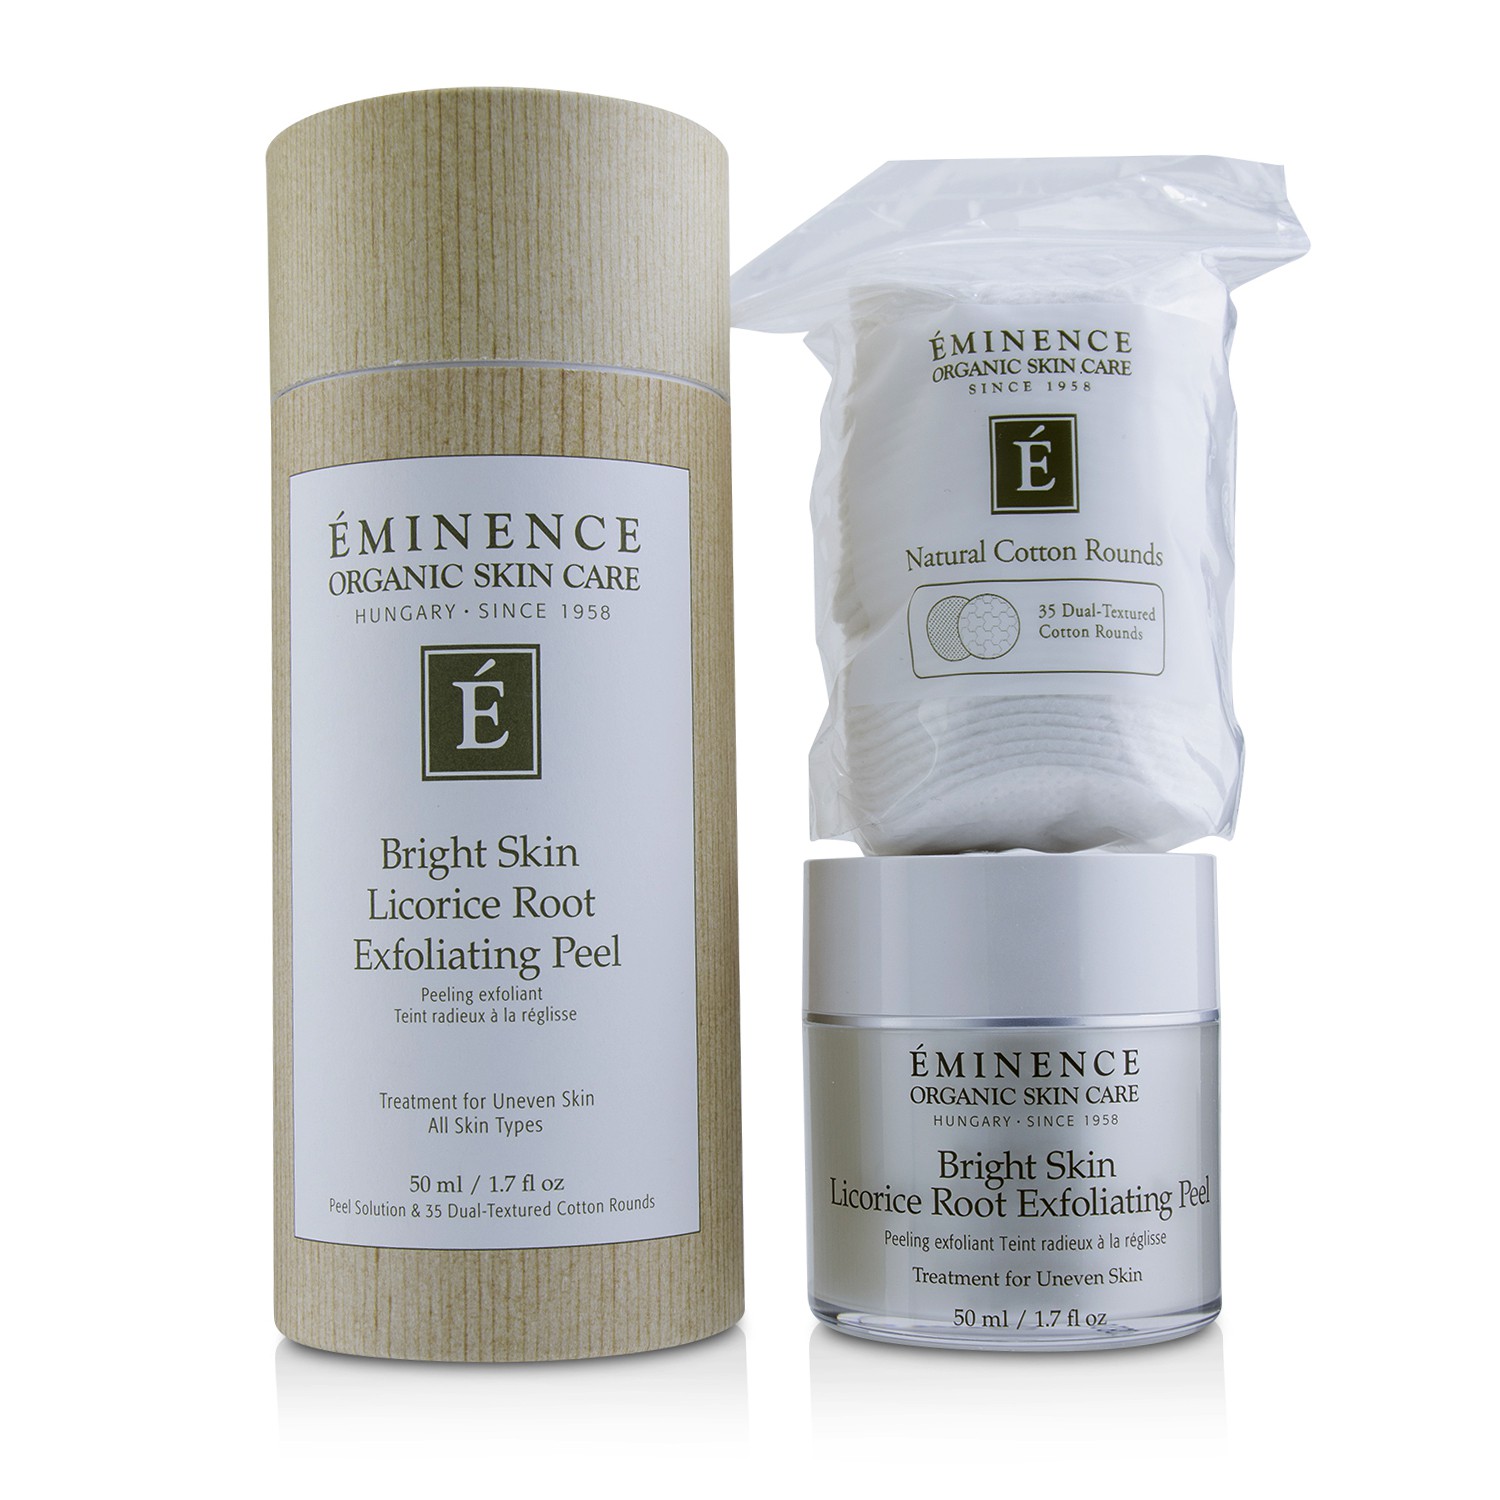 Bright Skin Licorice Root Exfoliating Peel (with 35 Dual-Textured Cotton Rounds) Eminence Image